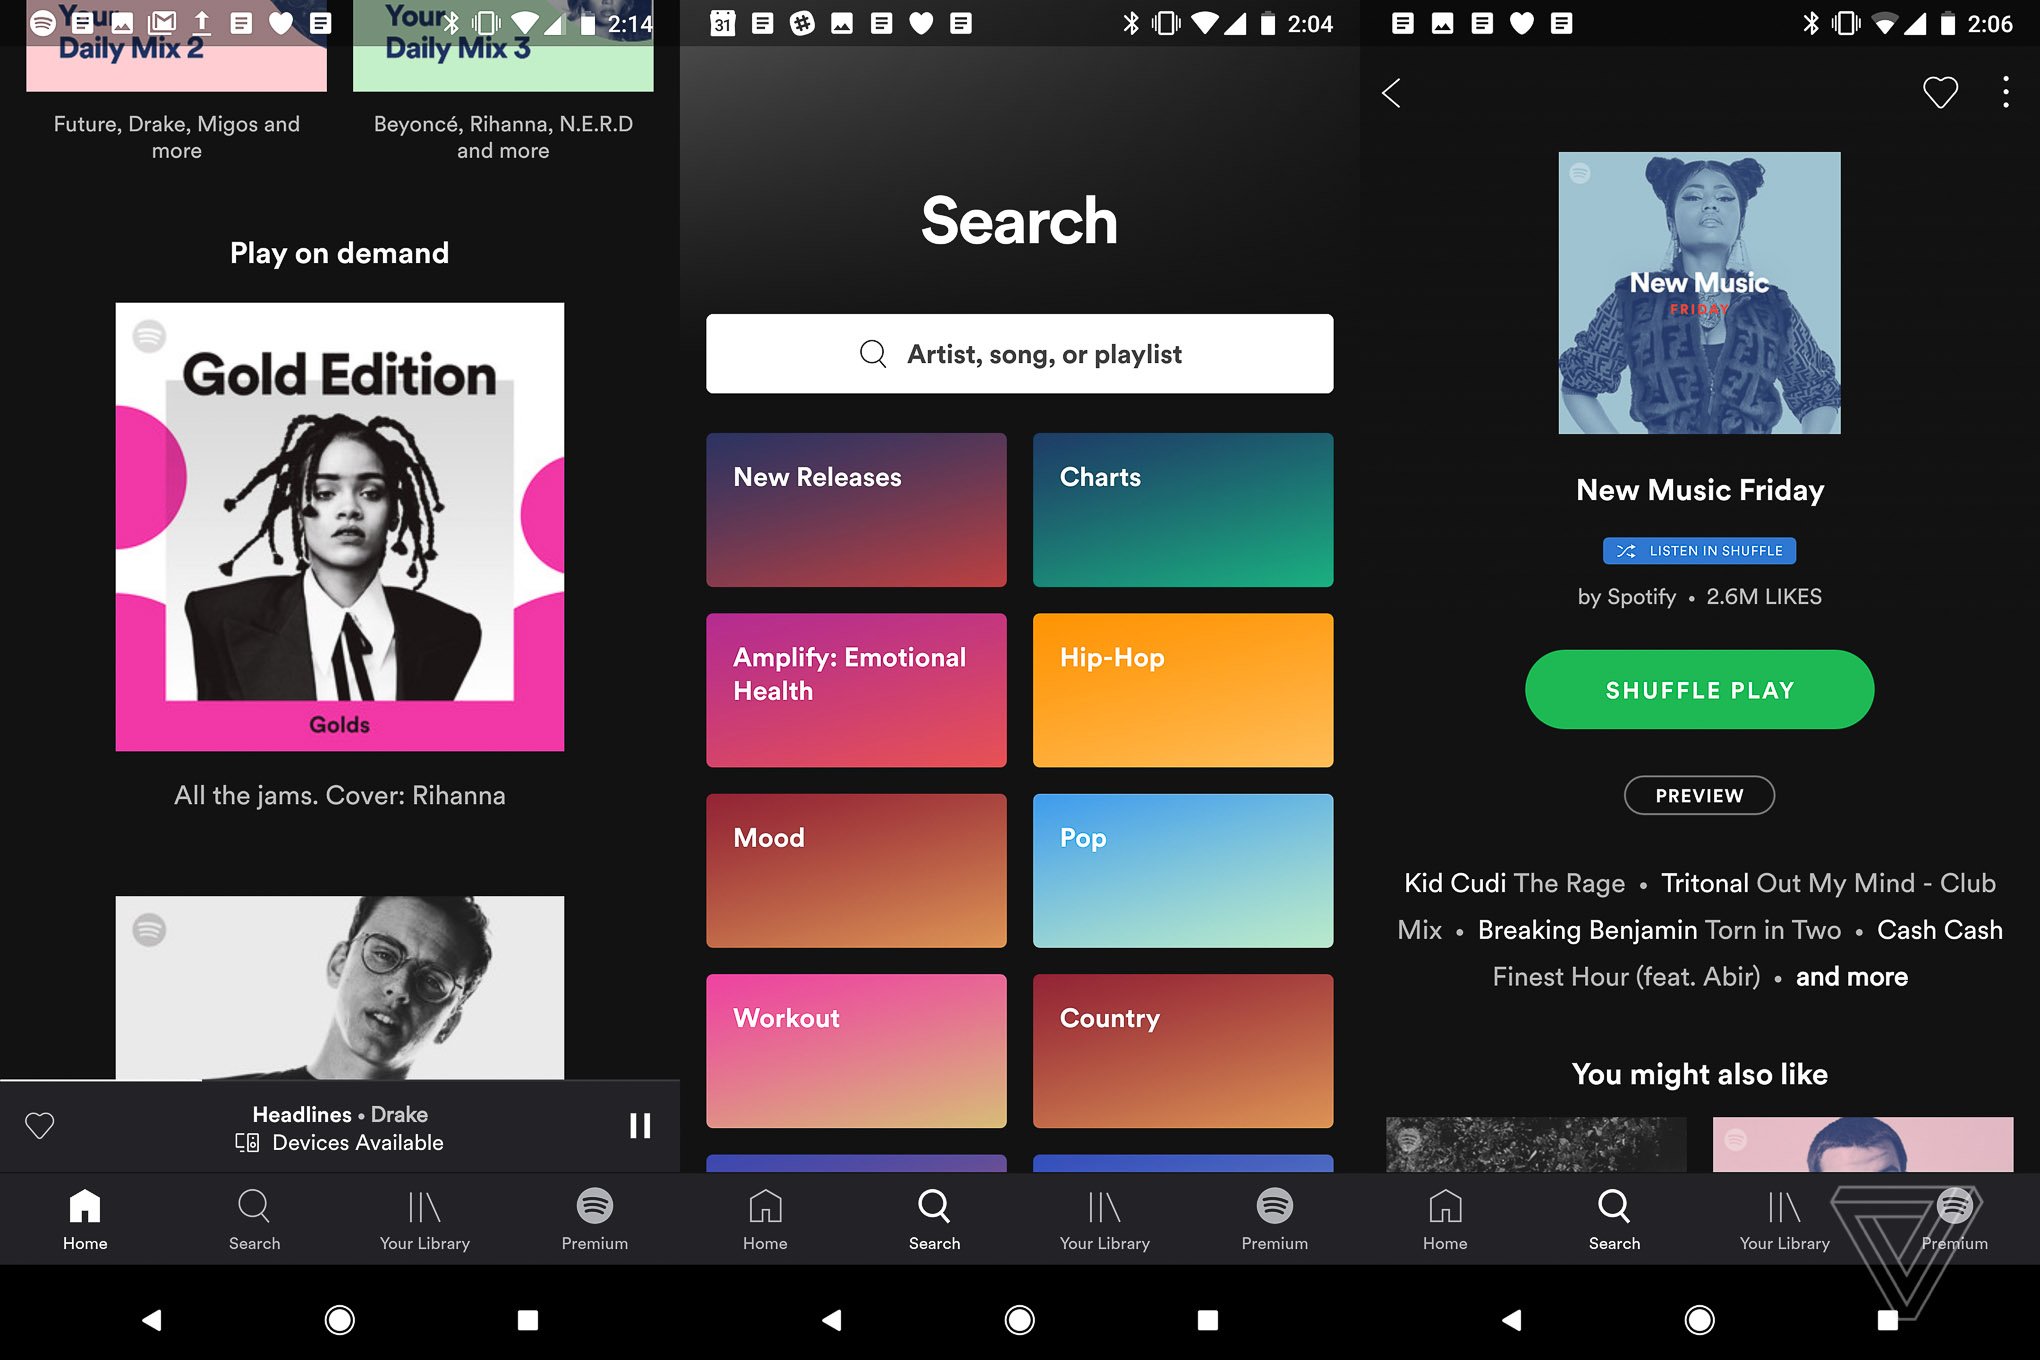 Spotify-Schnittstelle neues iPhone Android 1